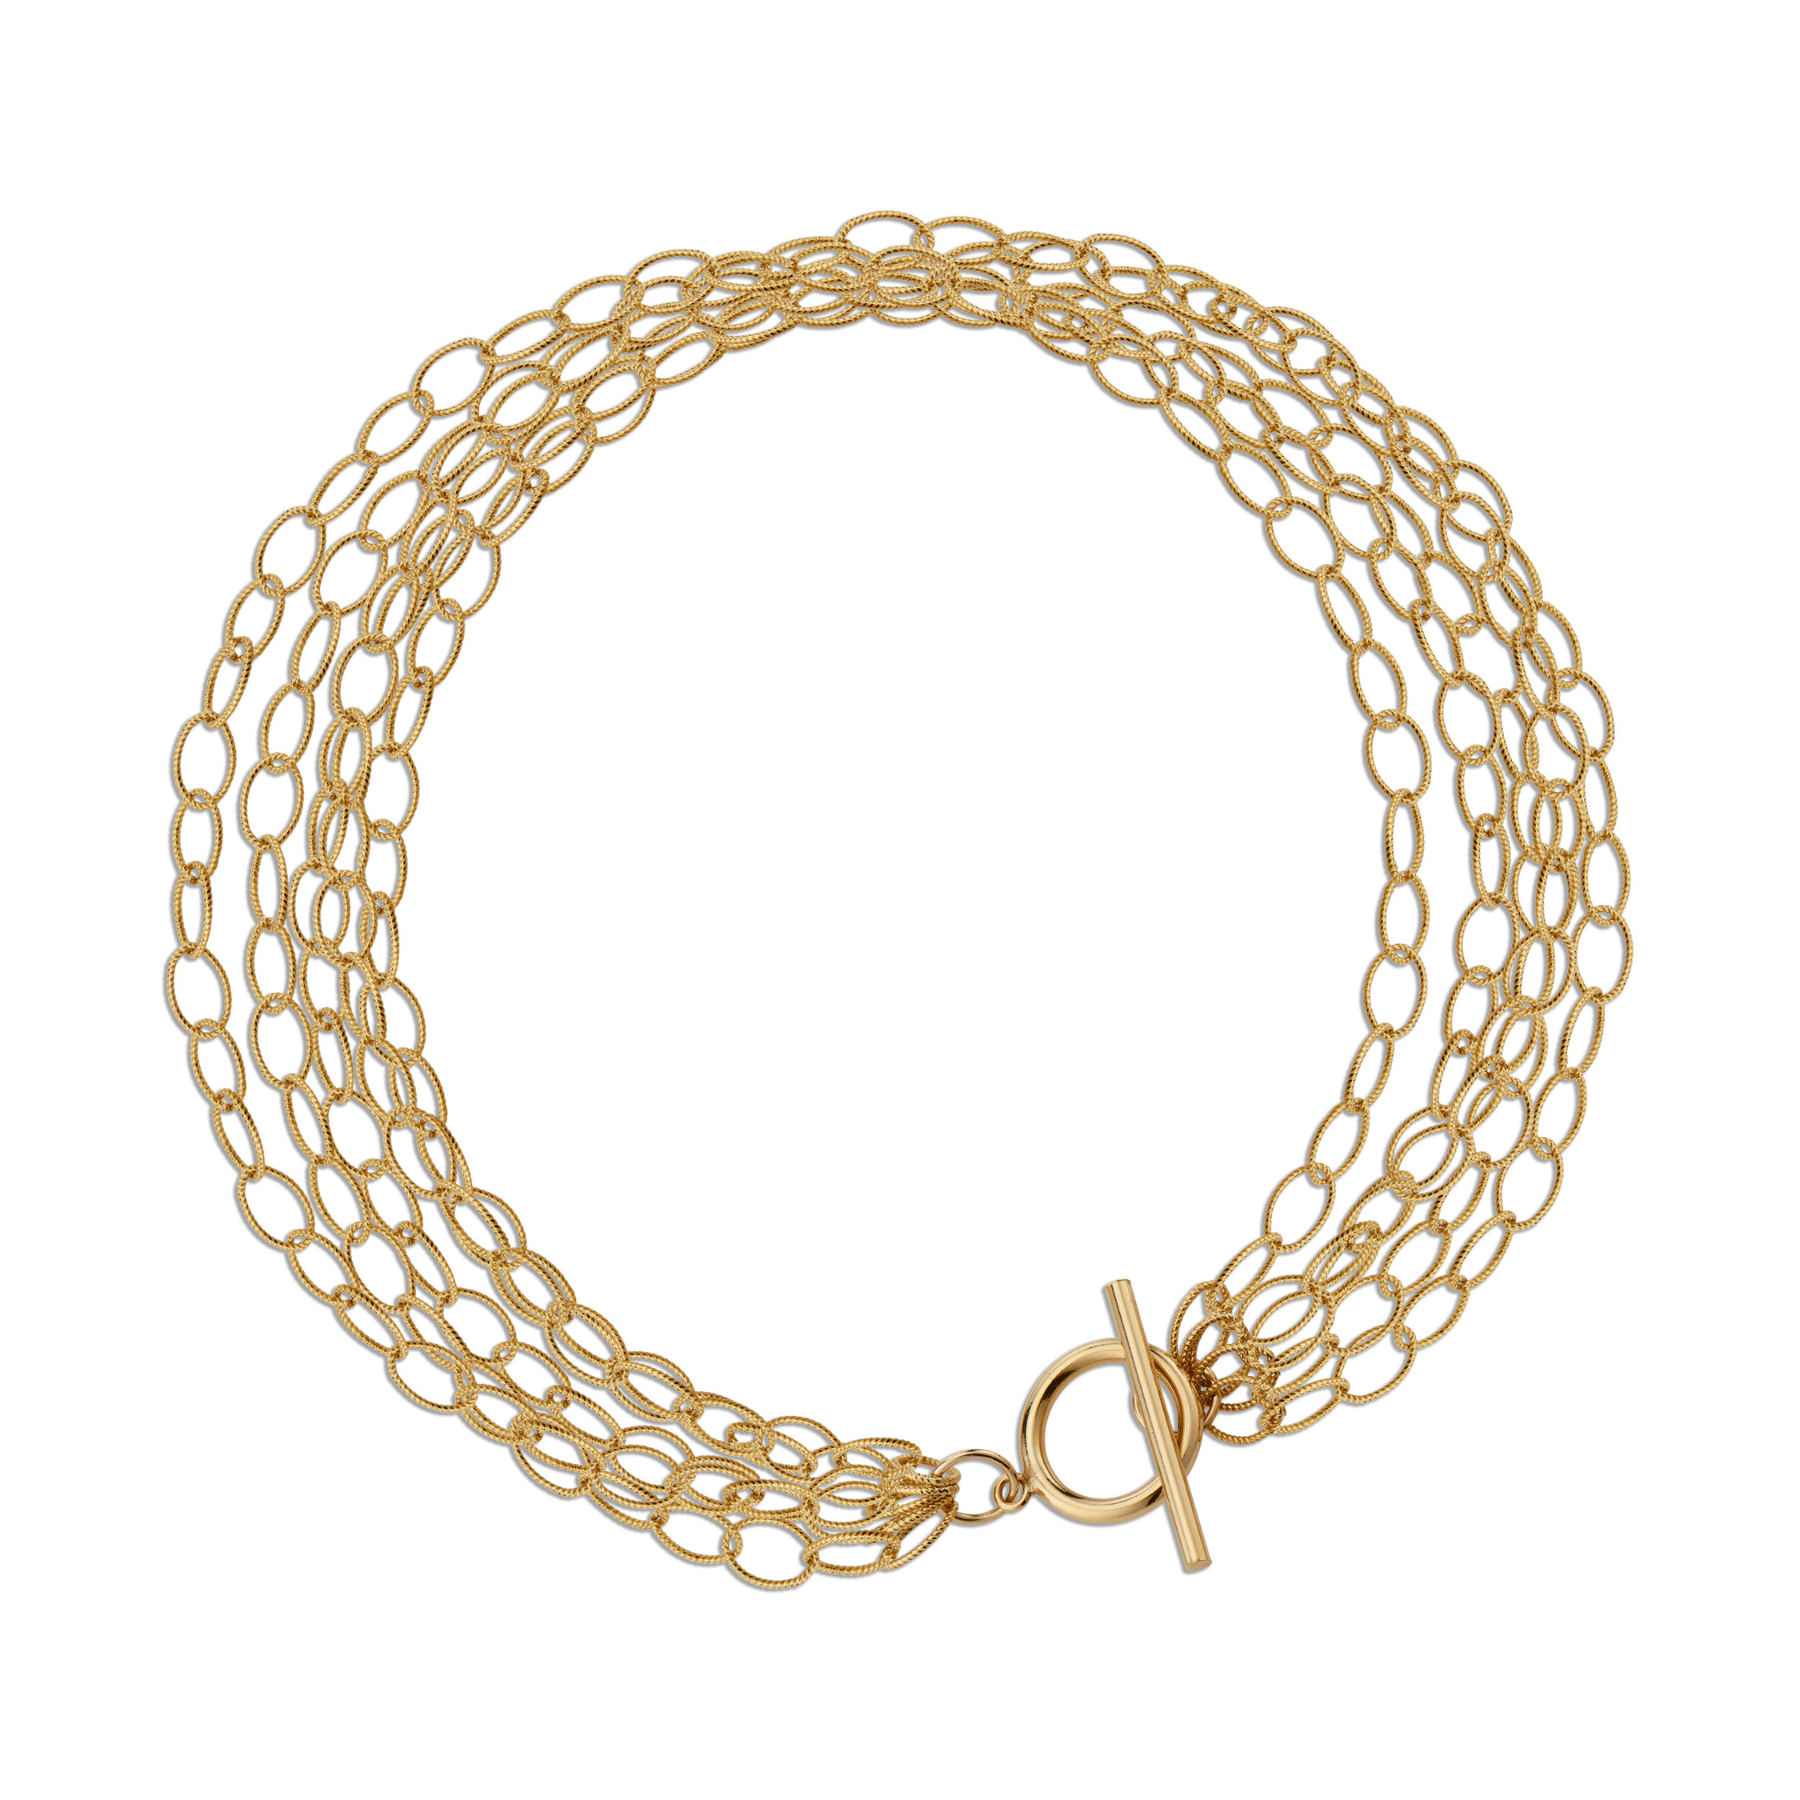 Delicate 14k gold filled multi-chain choker with toggle clasp.